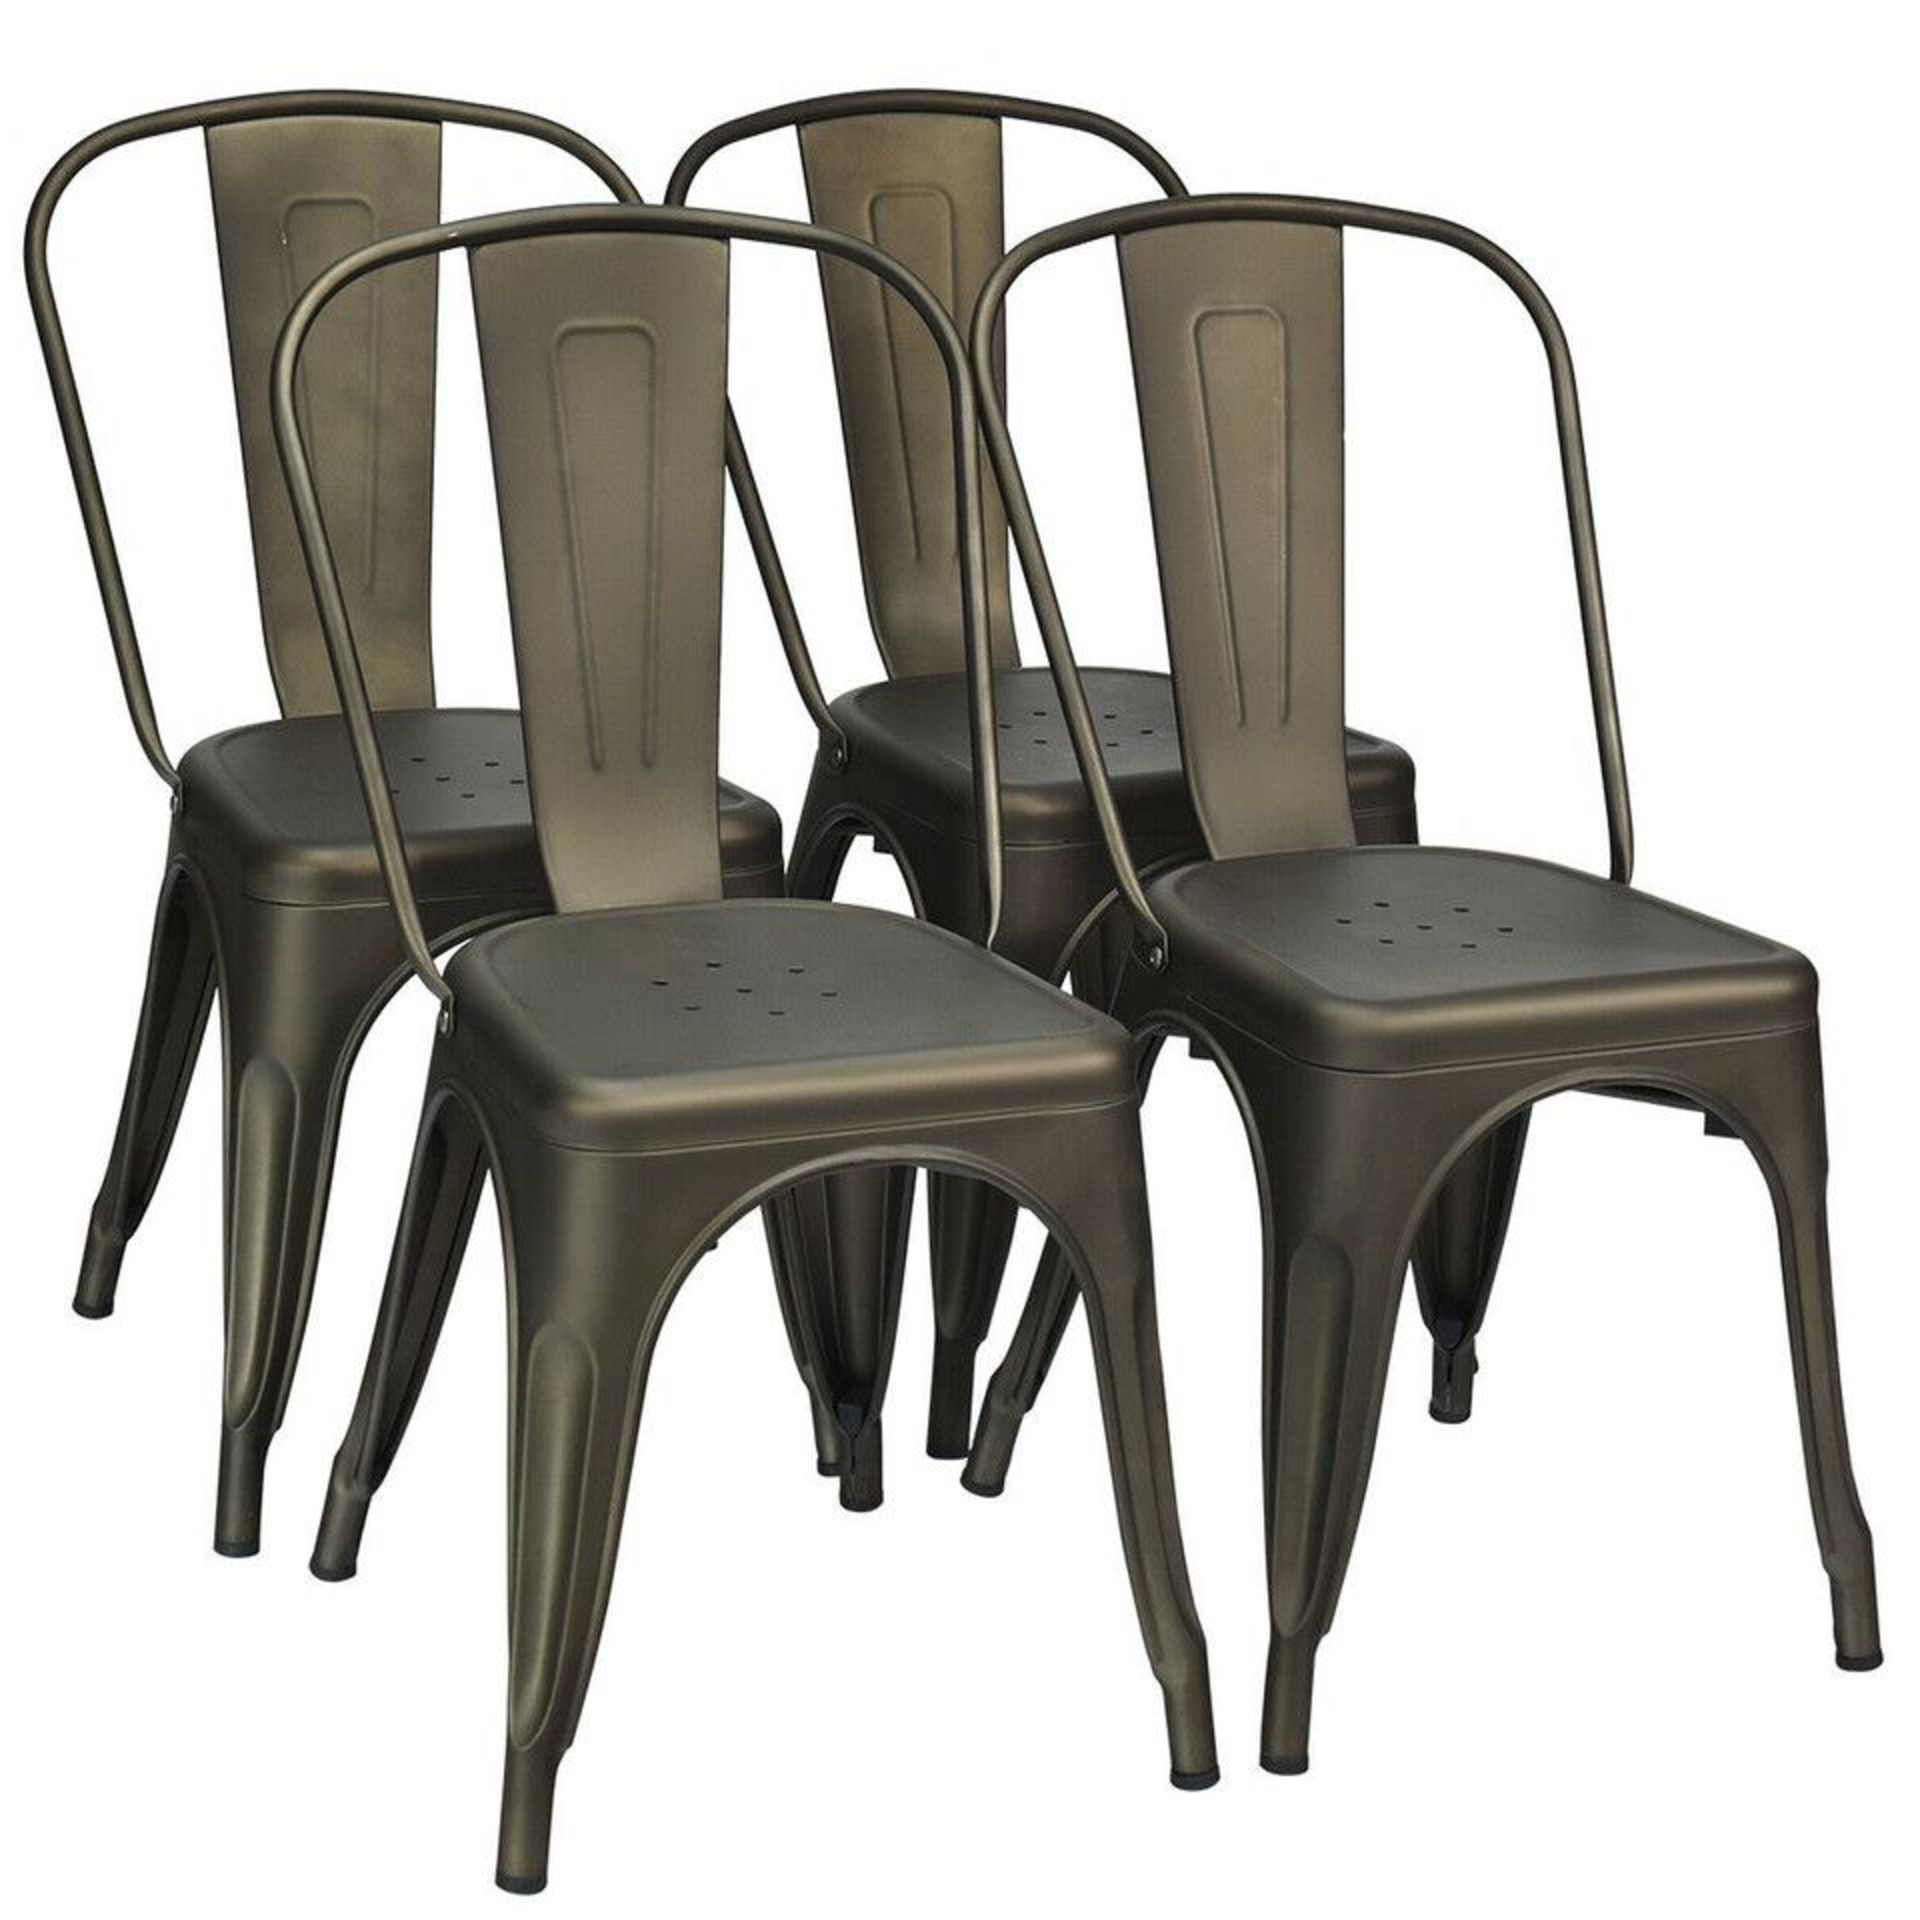 Set Of 4 Dining Side Stackable Cafe Metal Chairs. - ER53.